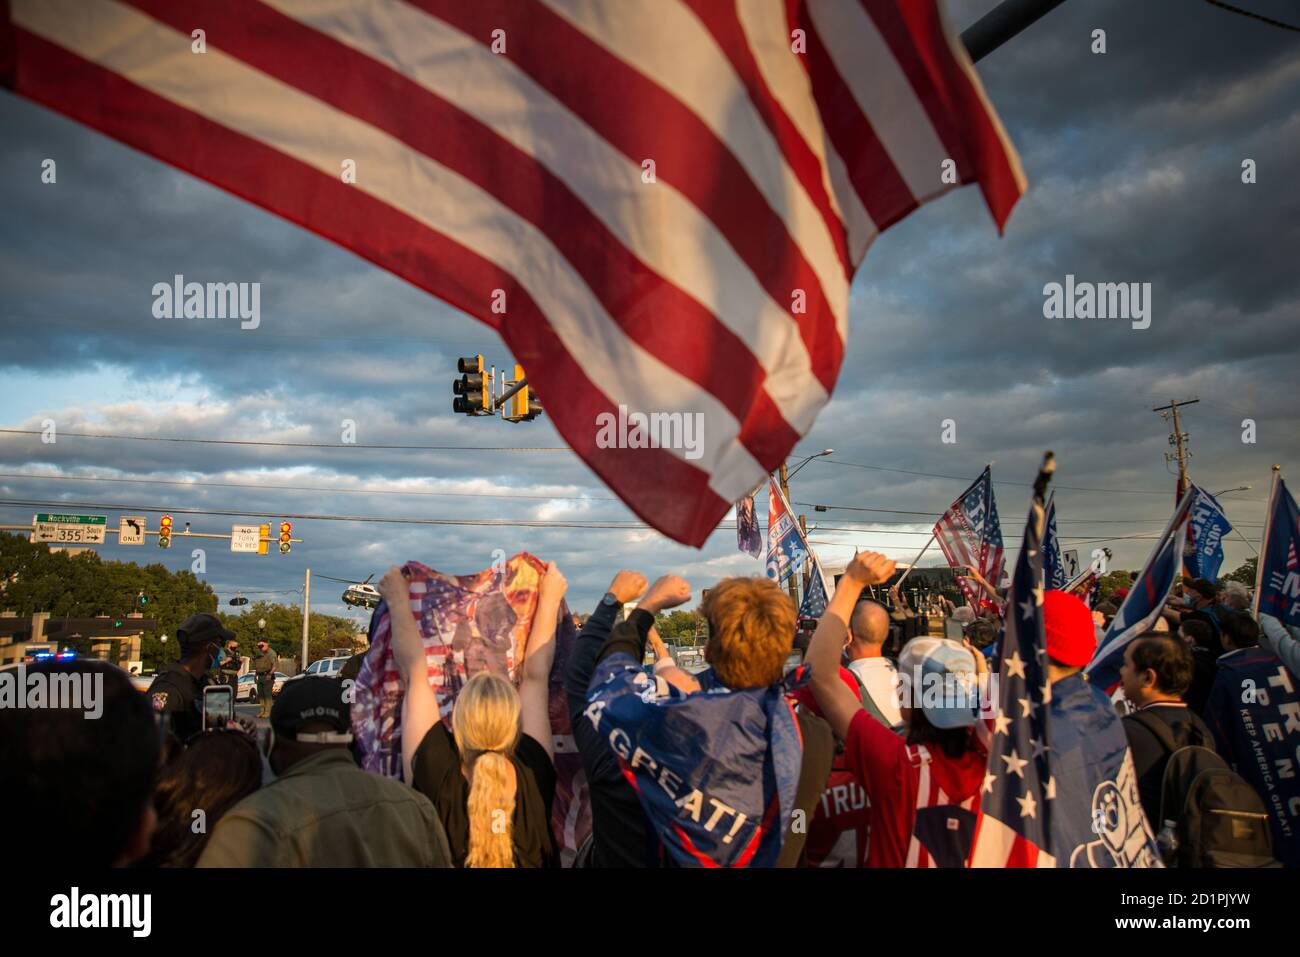 Crowd of Trump Supporters greeting Air Force 1 arrivial to Walter Read Hospital where President Trump was treated for Covid 19. Oct 5, 2020 Stock Photo